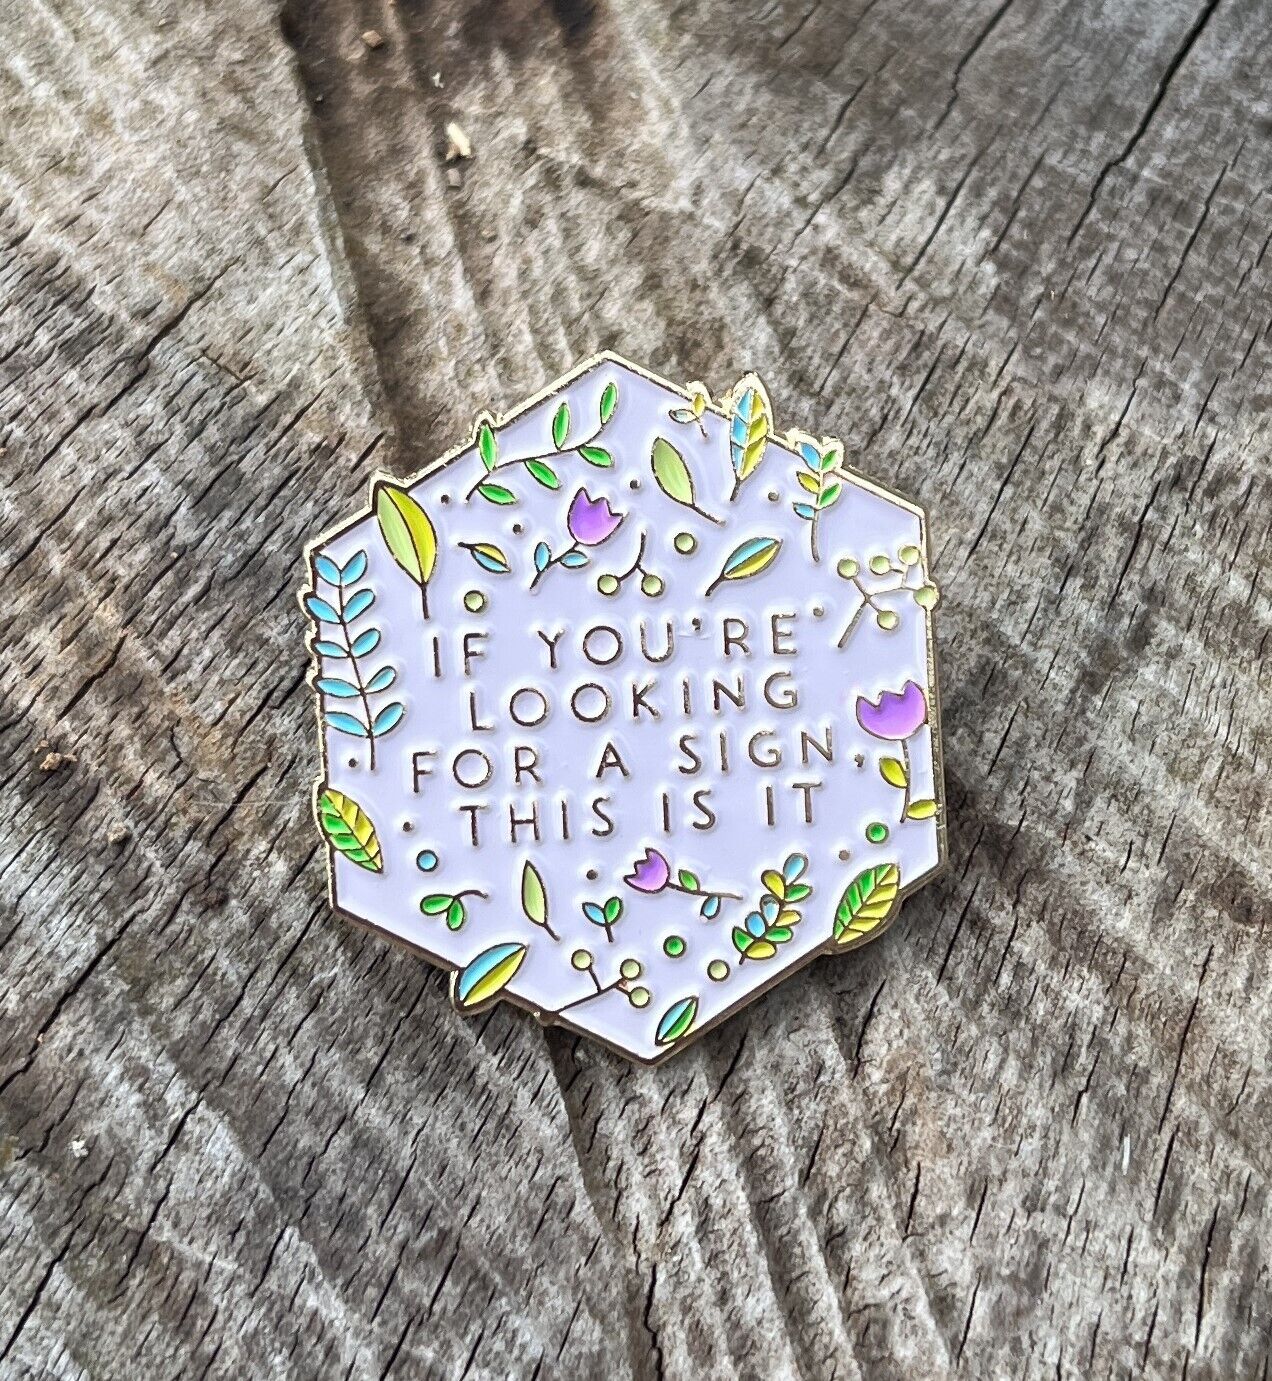 Mental Health Awareness Enamel Pin Badge \'If You\'re Looking for a Sign\' - MIND